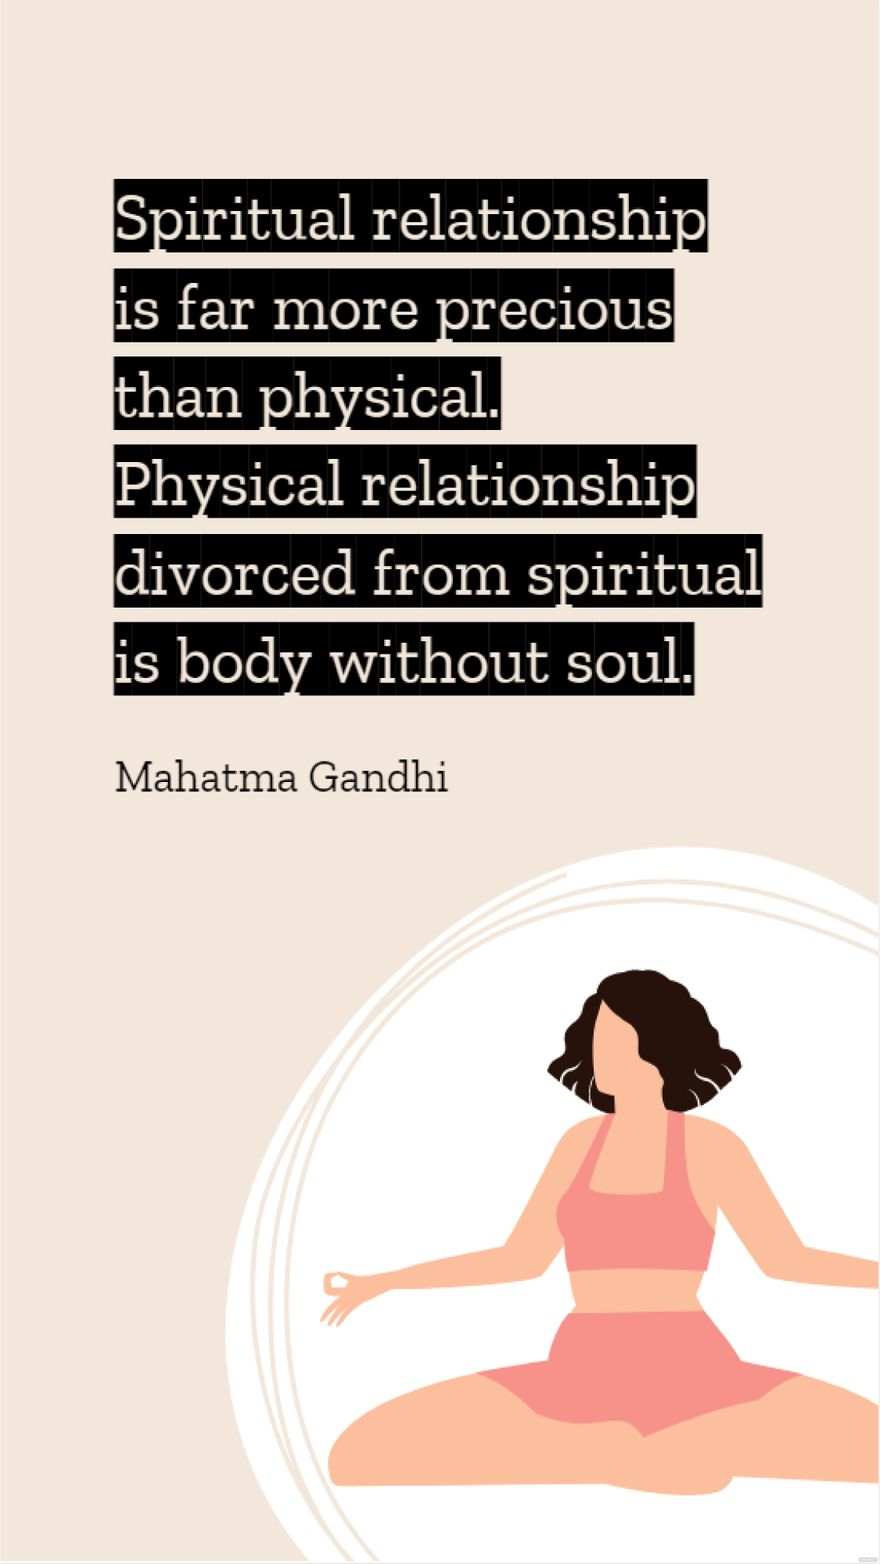 Mahatma Gandhi - Spiritual relationship is far more precious than physical. Physical relationship divorced from spiritual is body without soul.